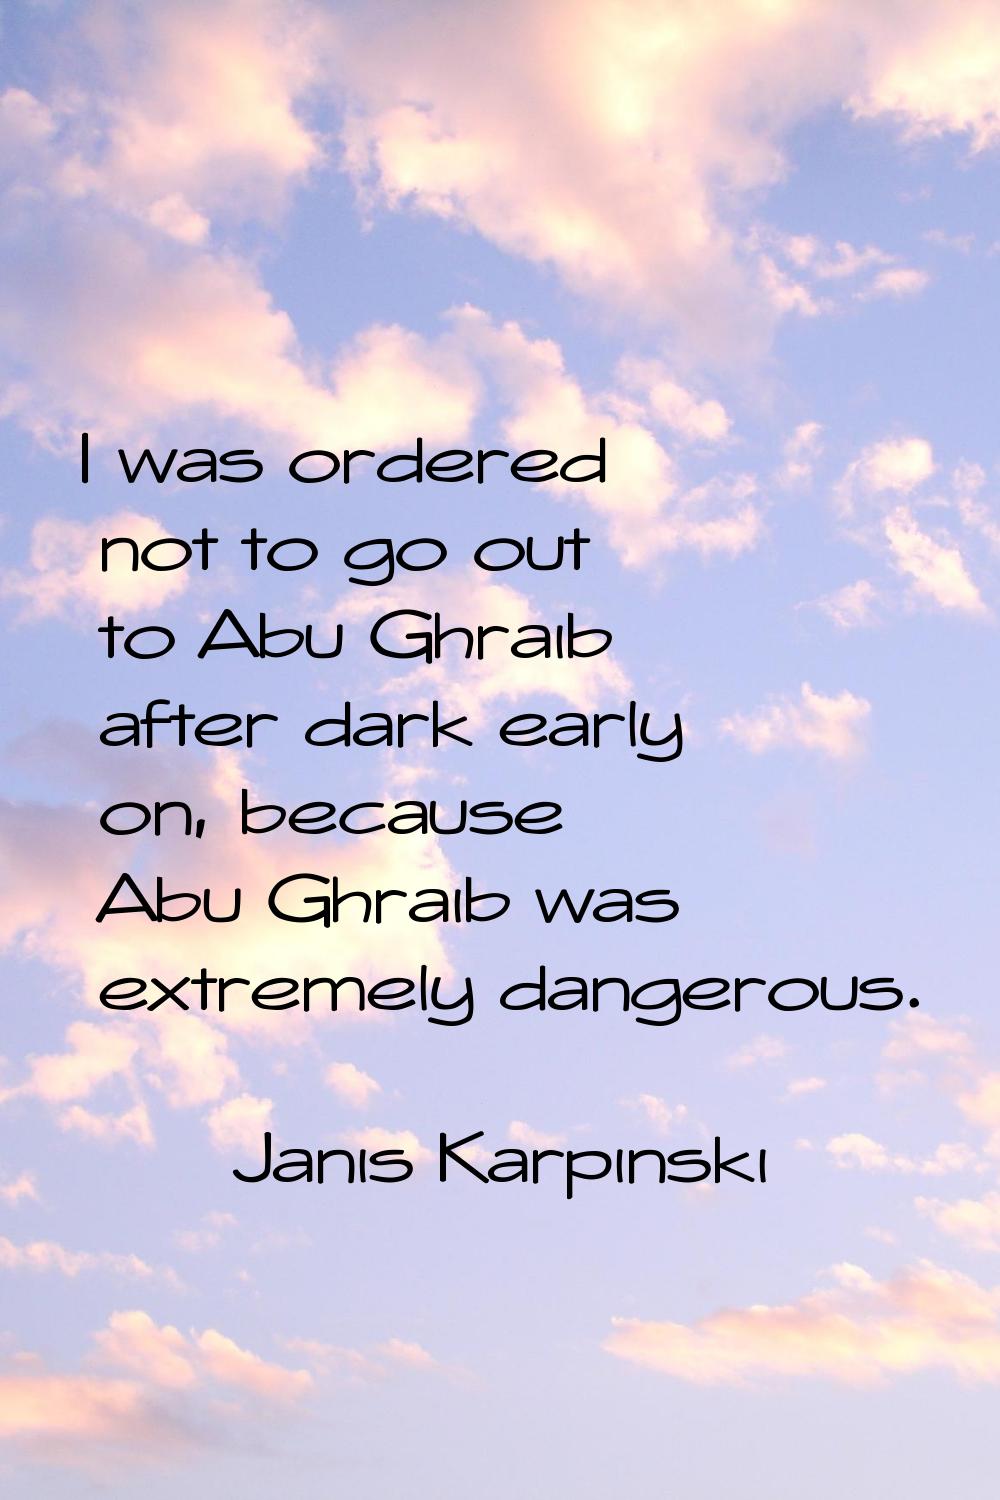 I was ordered not to go out to Abu Ghraib after dark early on, because Abu Ghraib was extremely dan